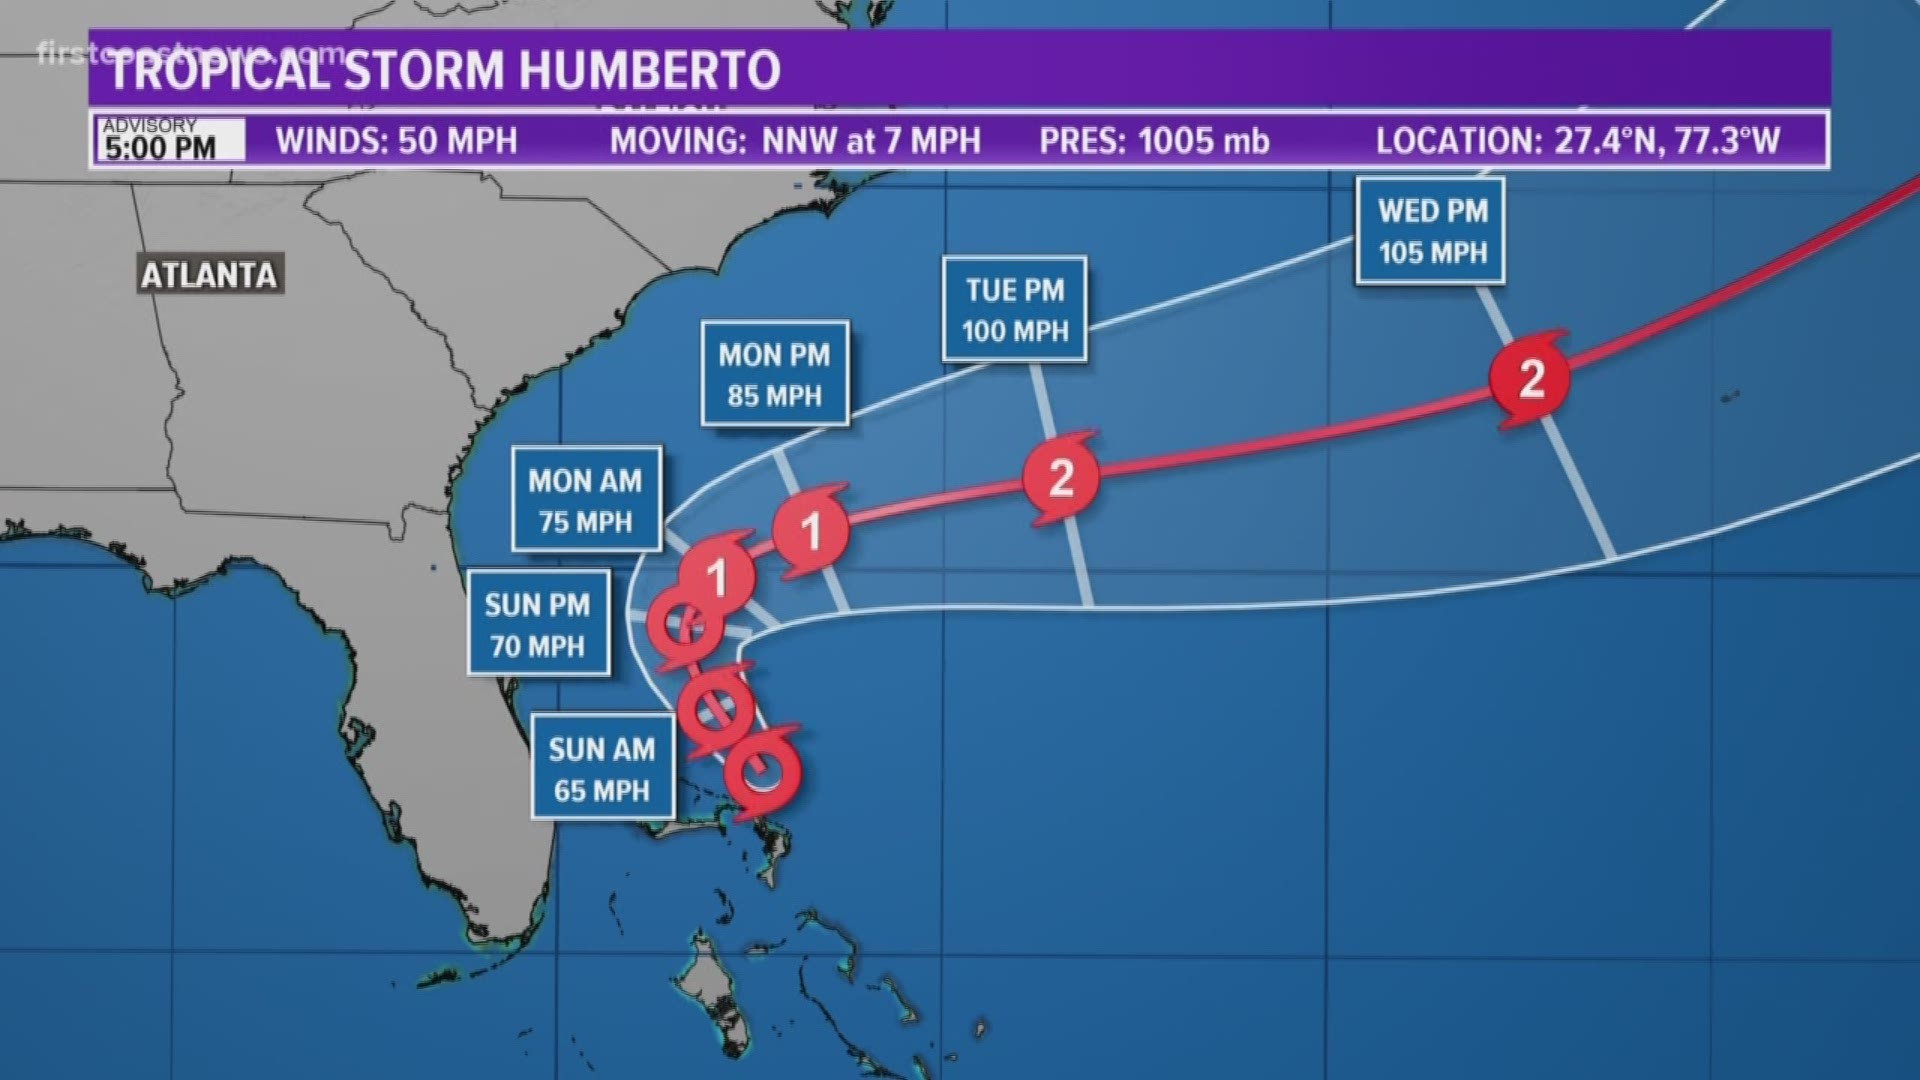 5 P.M. ADVISORY -- Humberto is forecast to become a hurricane by Sunday night or early Monday as it's curving out to sea, away from the First Coast.